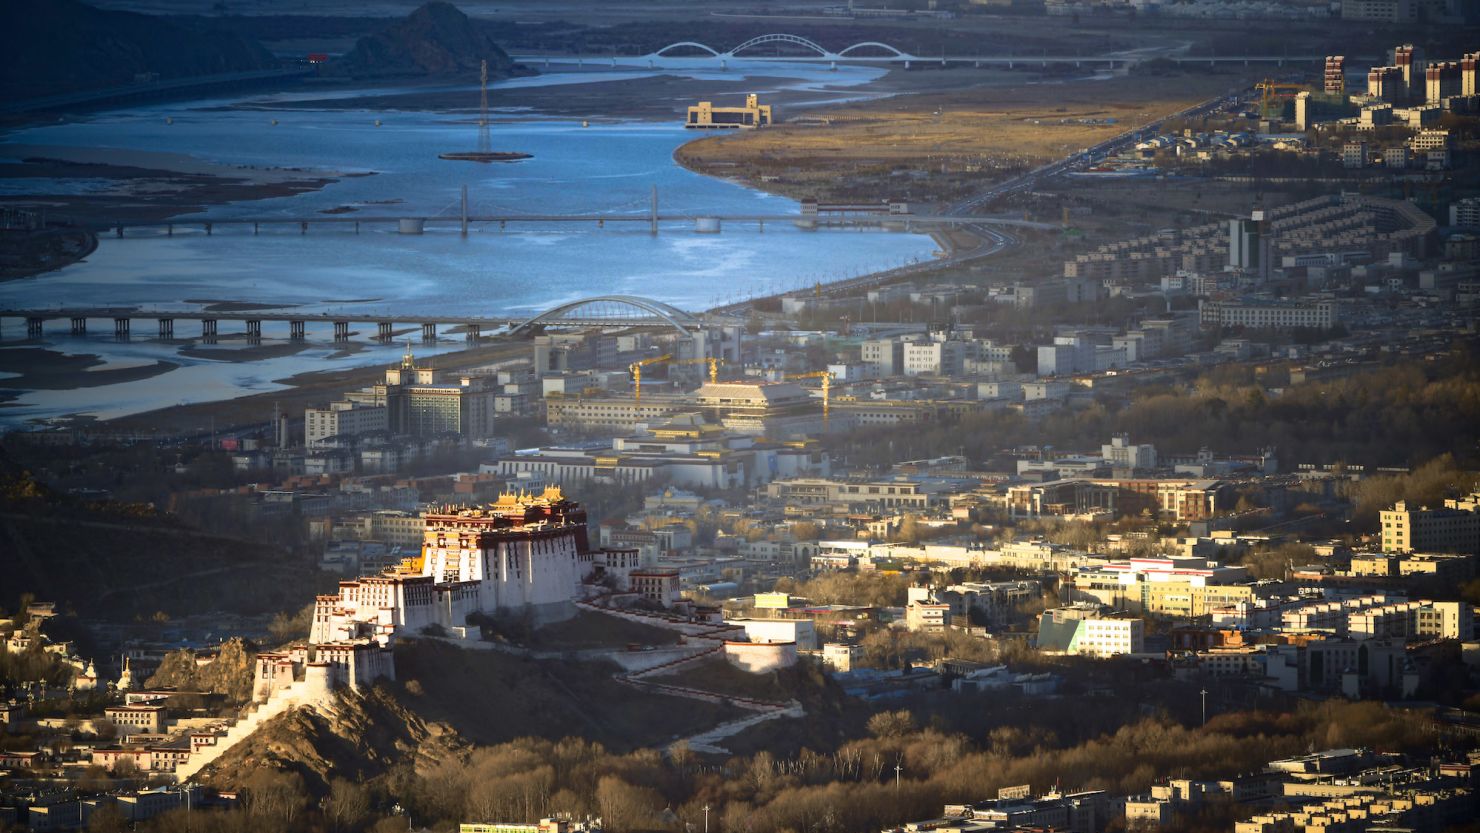 A view of Lhasa in Tibet.